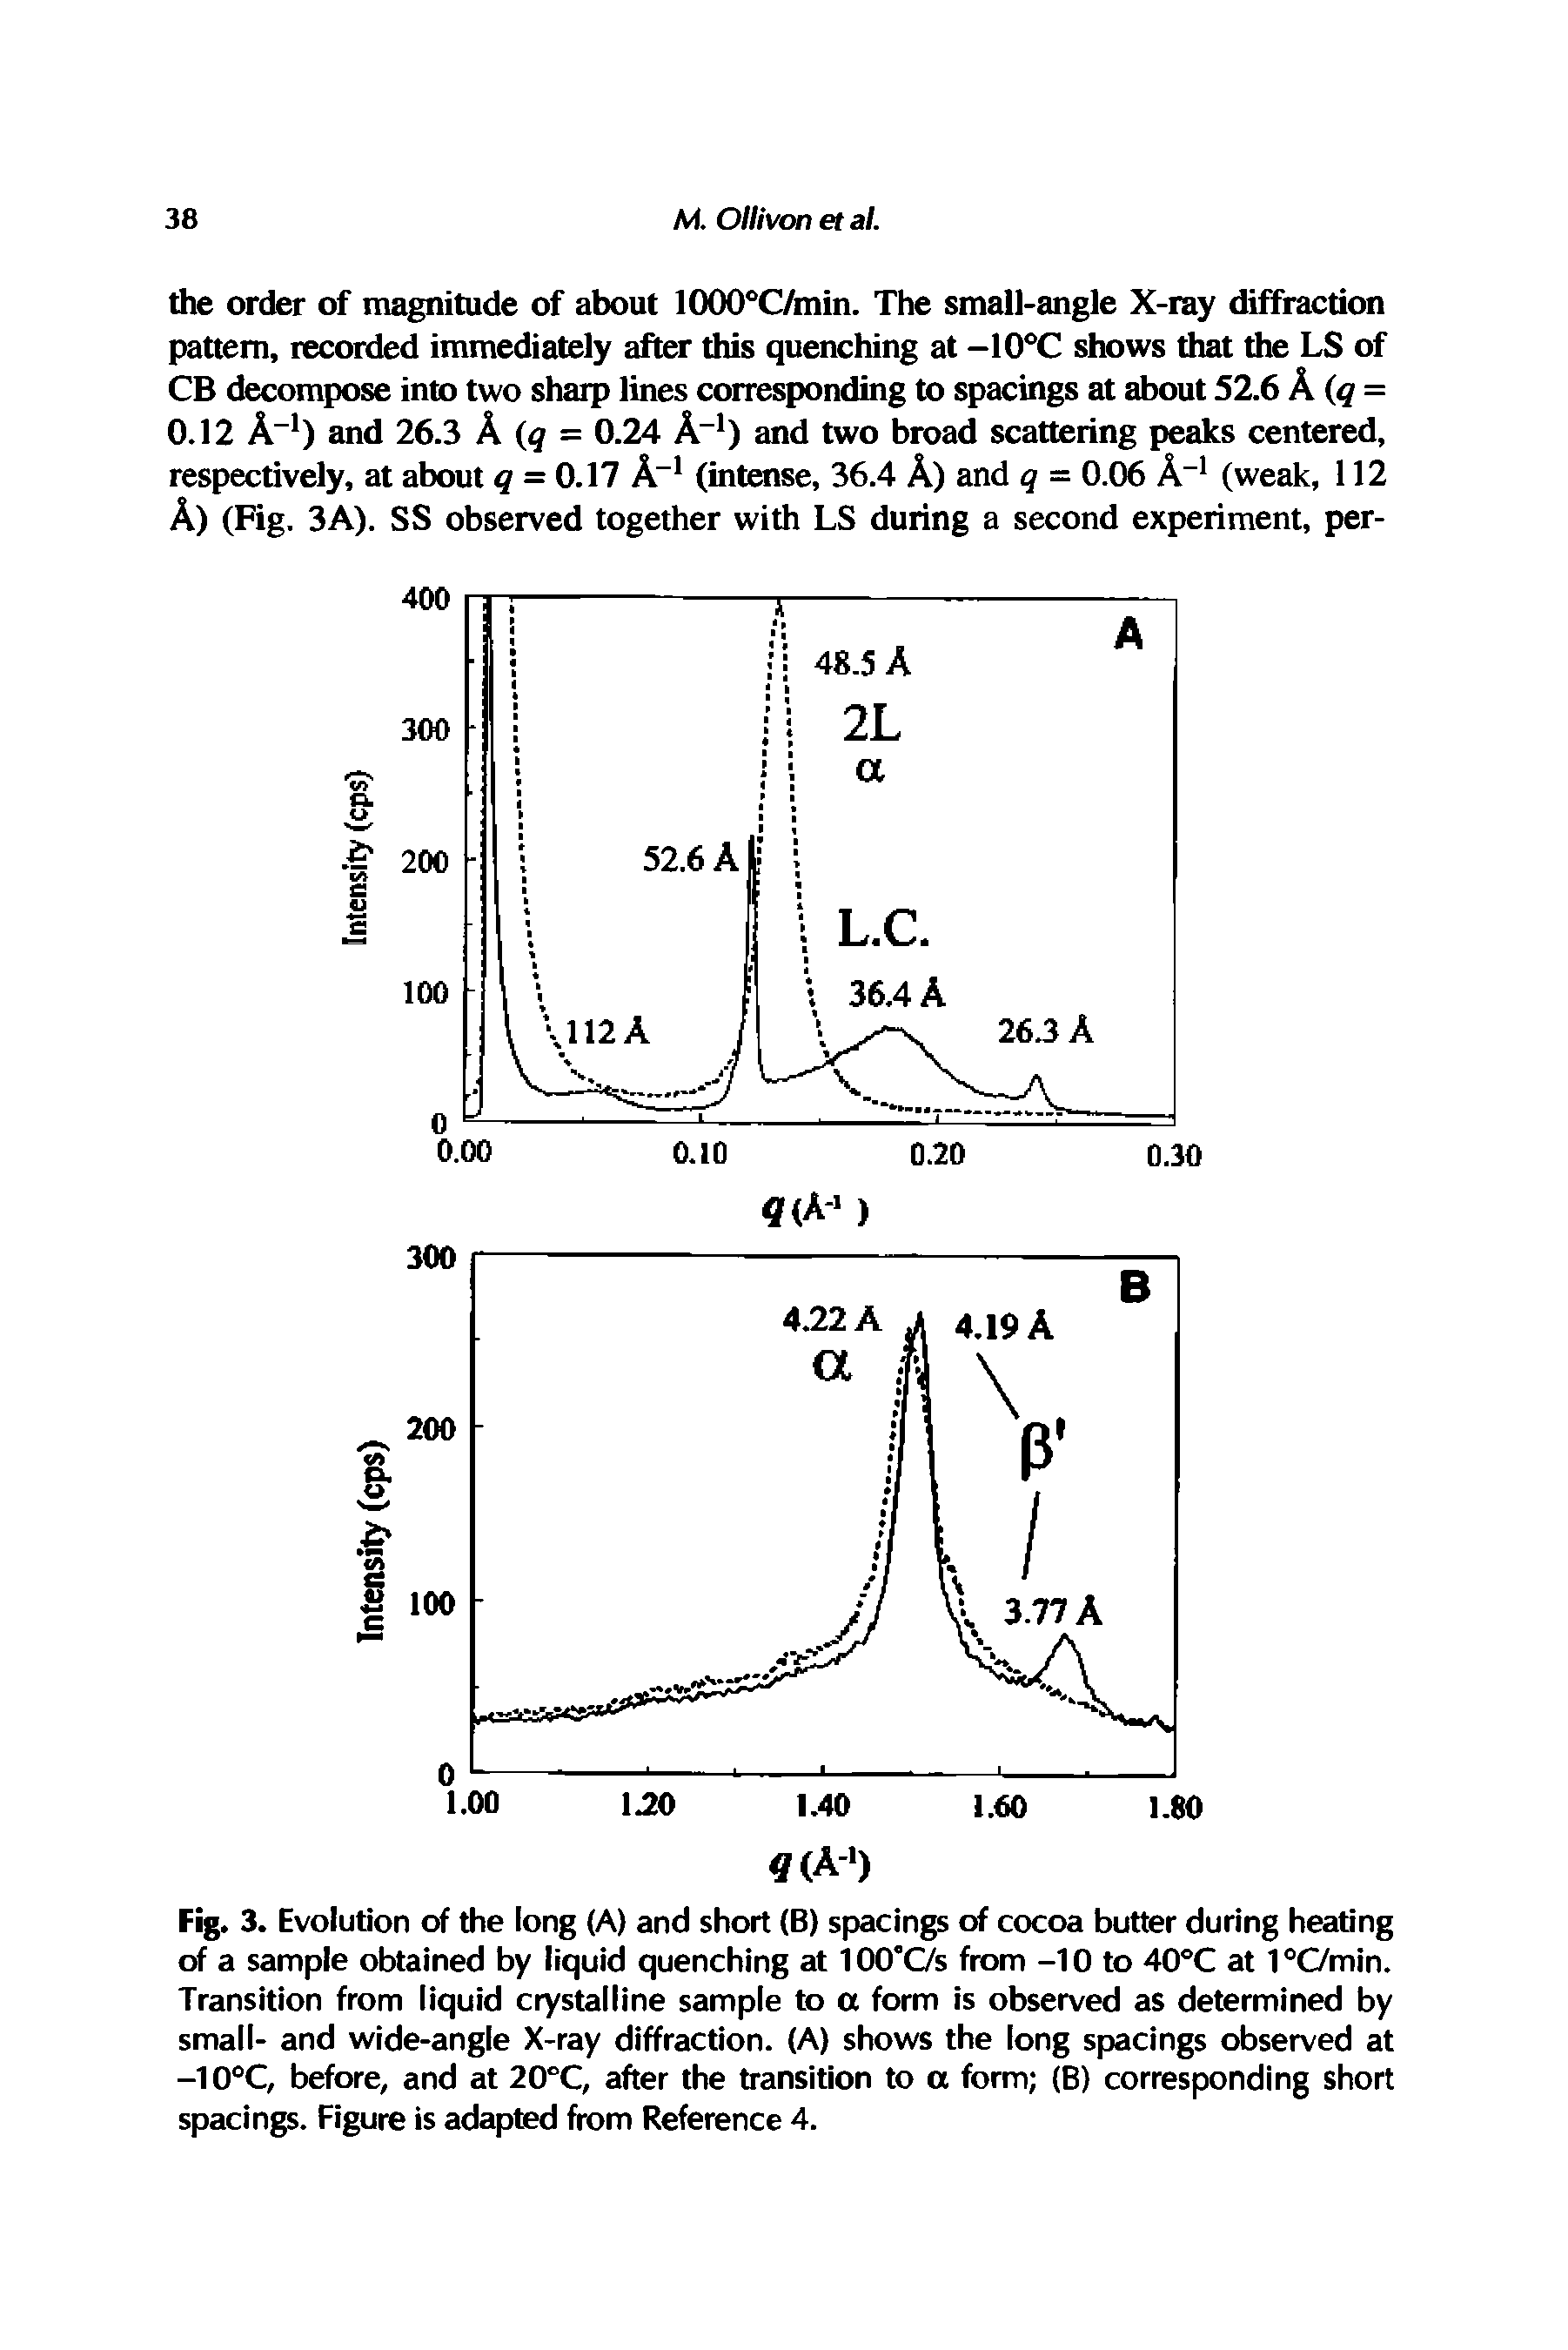 Fig. 3. Evolution of the long (A) and short (B) spacings of cocoa butter during heating of a sample obtained by liquid quenching at 100°C/s from -10 to 40°C at 1 °C/min. Transition from liquid crystalline sample to a form is observed as determined by small- and wide-angle X-ray diffraction. (A) shows the long spacings observed at -10°C, before, and at 20°C, after the transition to a form (B) corresponding short spacings. Figure is adapted from Reference 4.